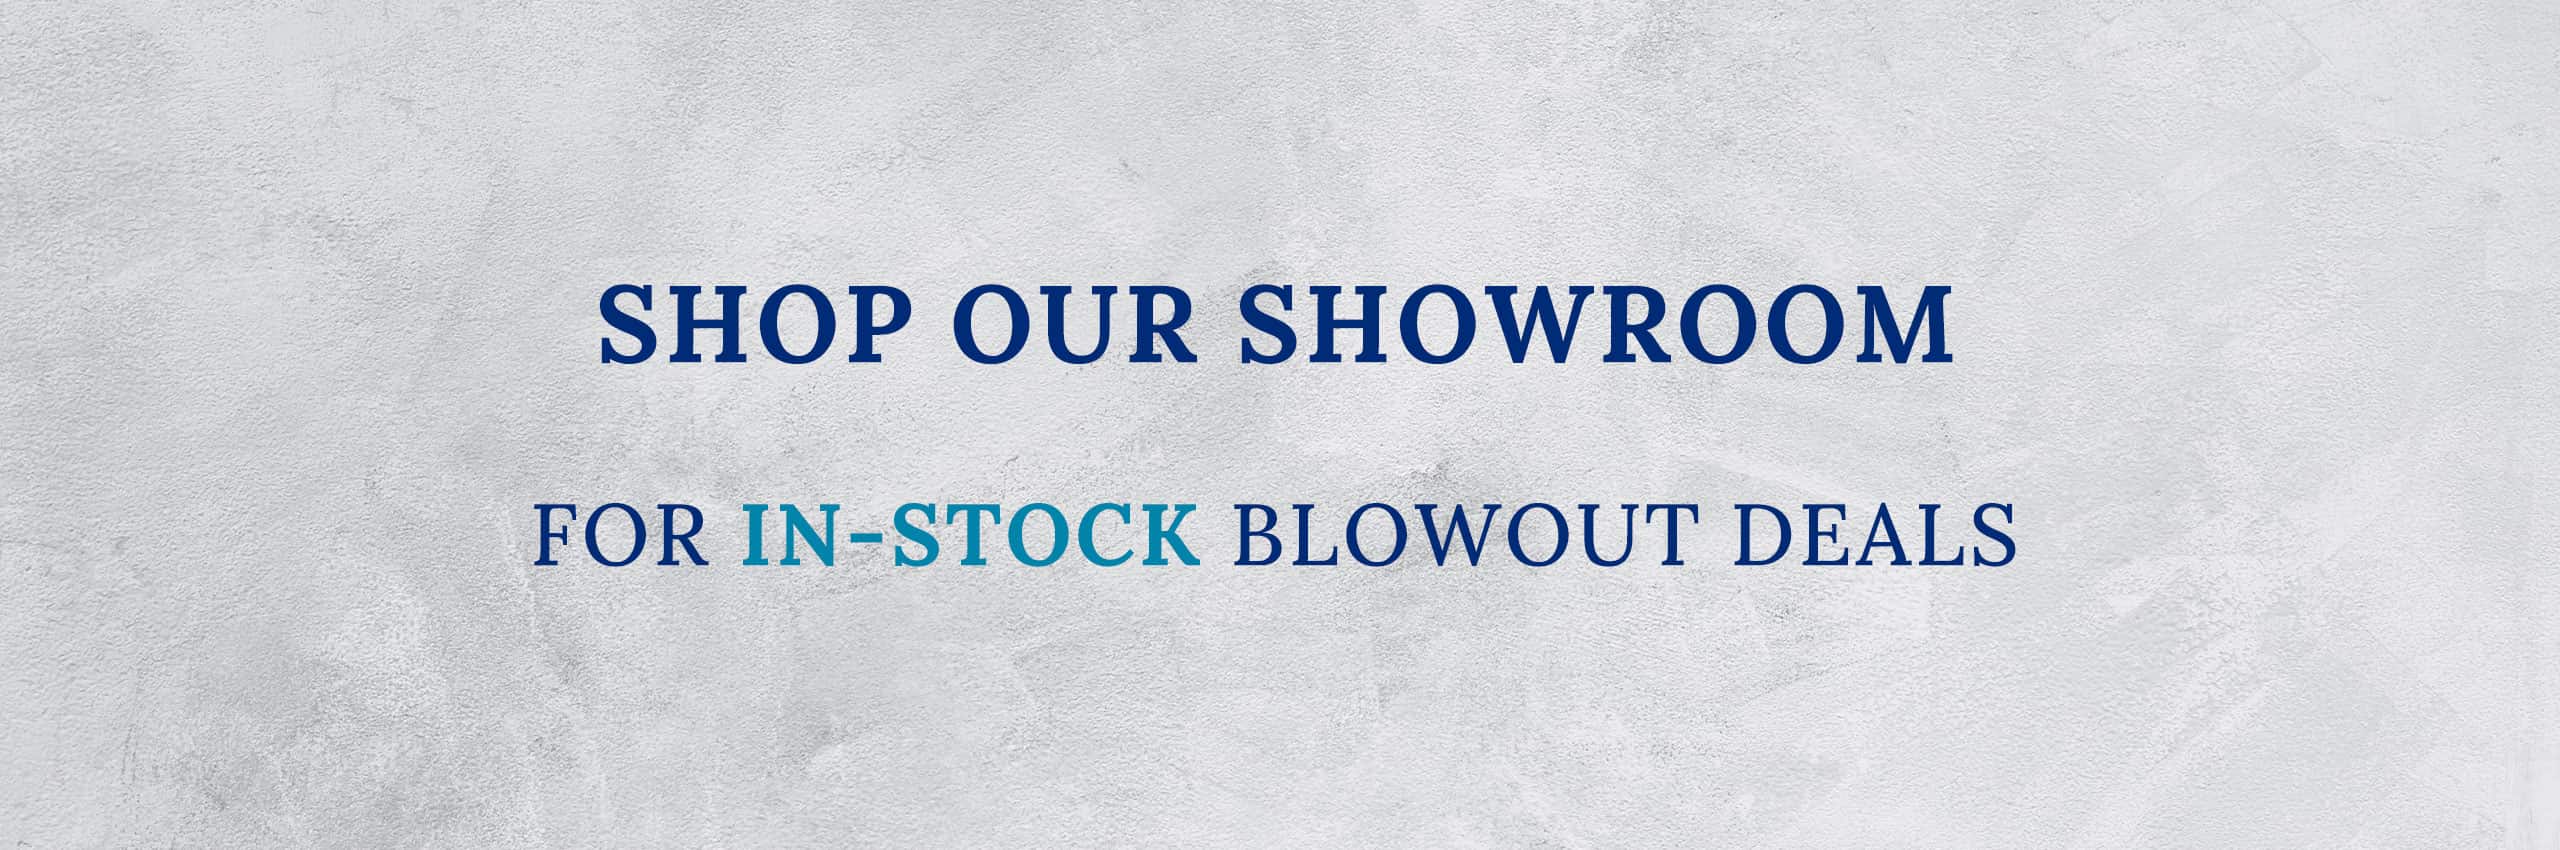 Shop our showroom for in stock blowout deals